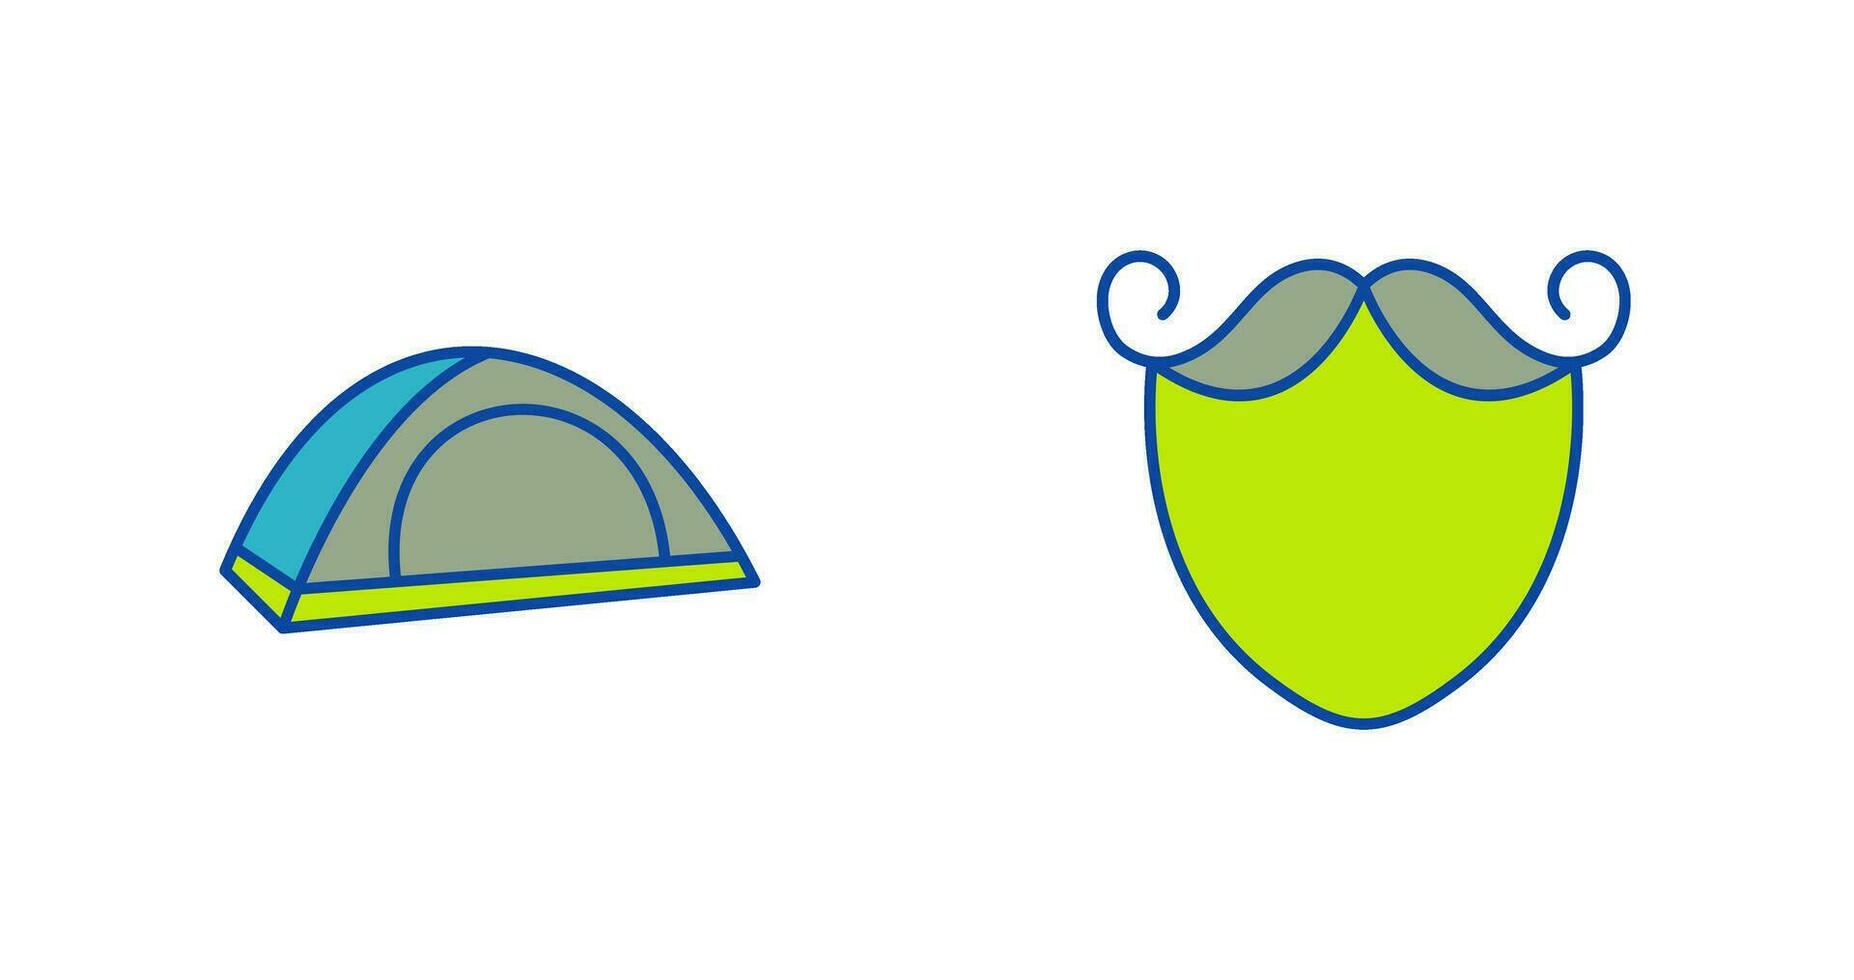 Beard and Moustache and Camp Icon vector